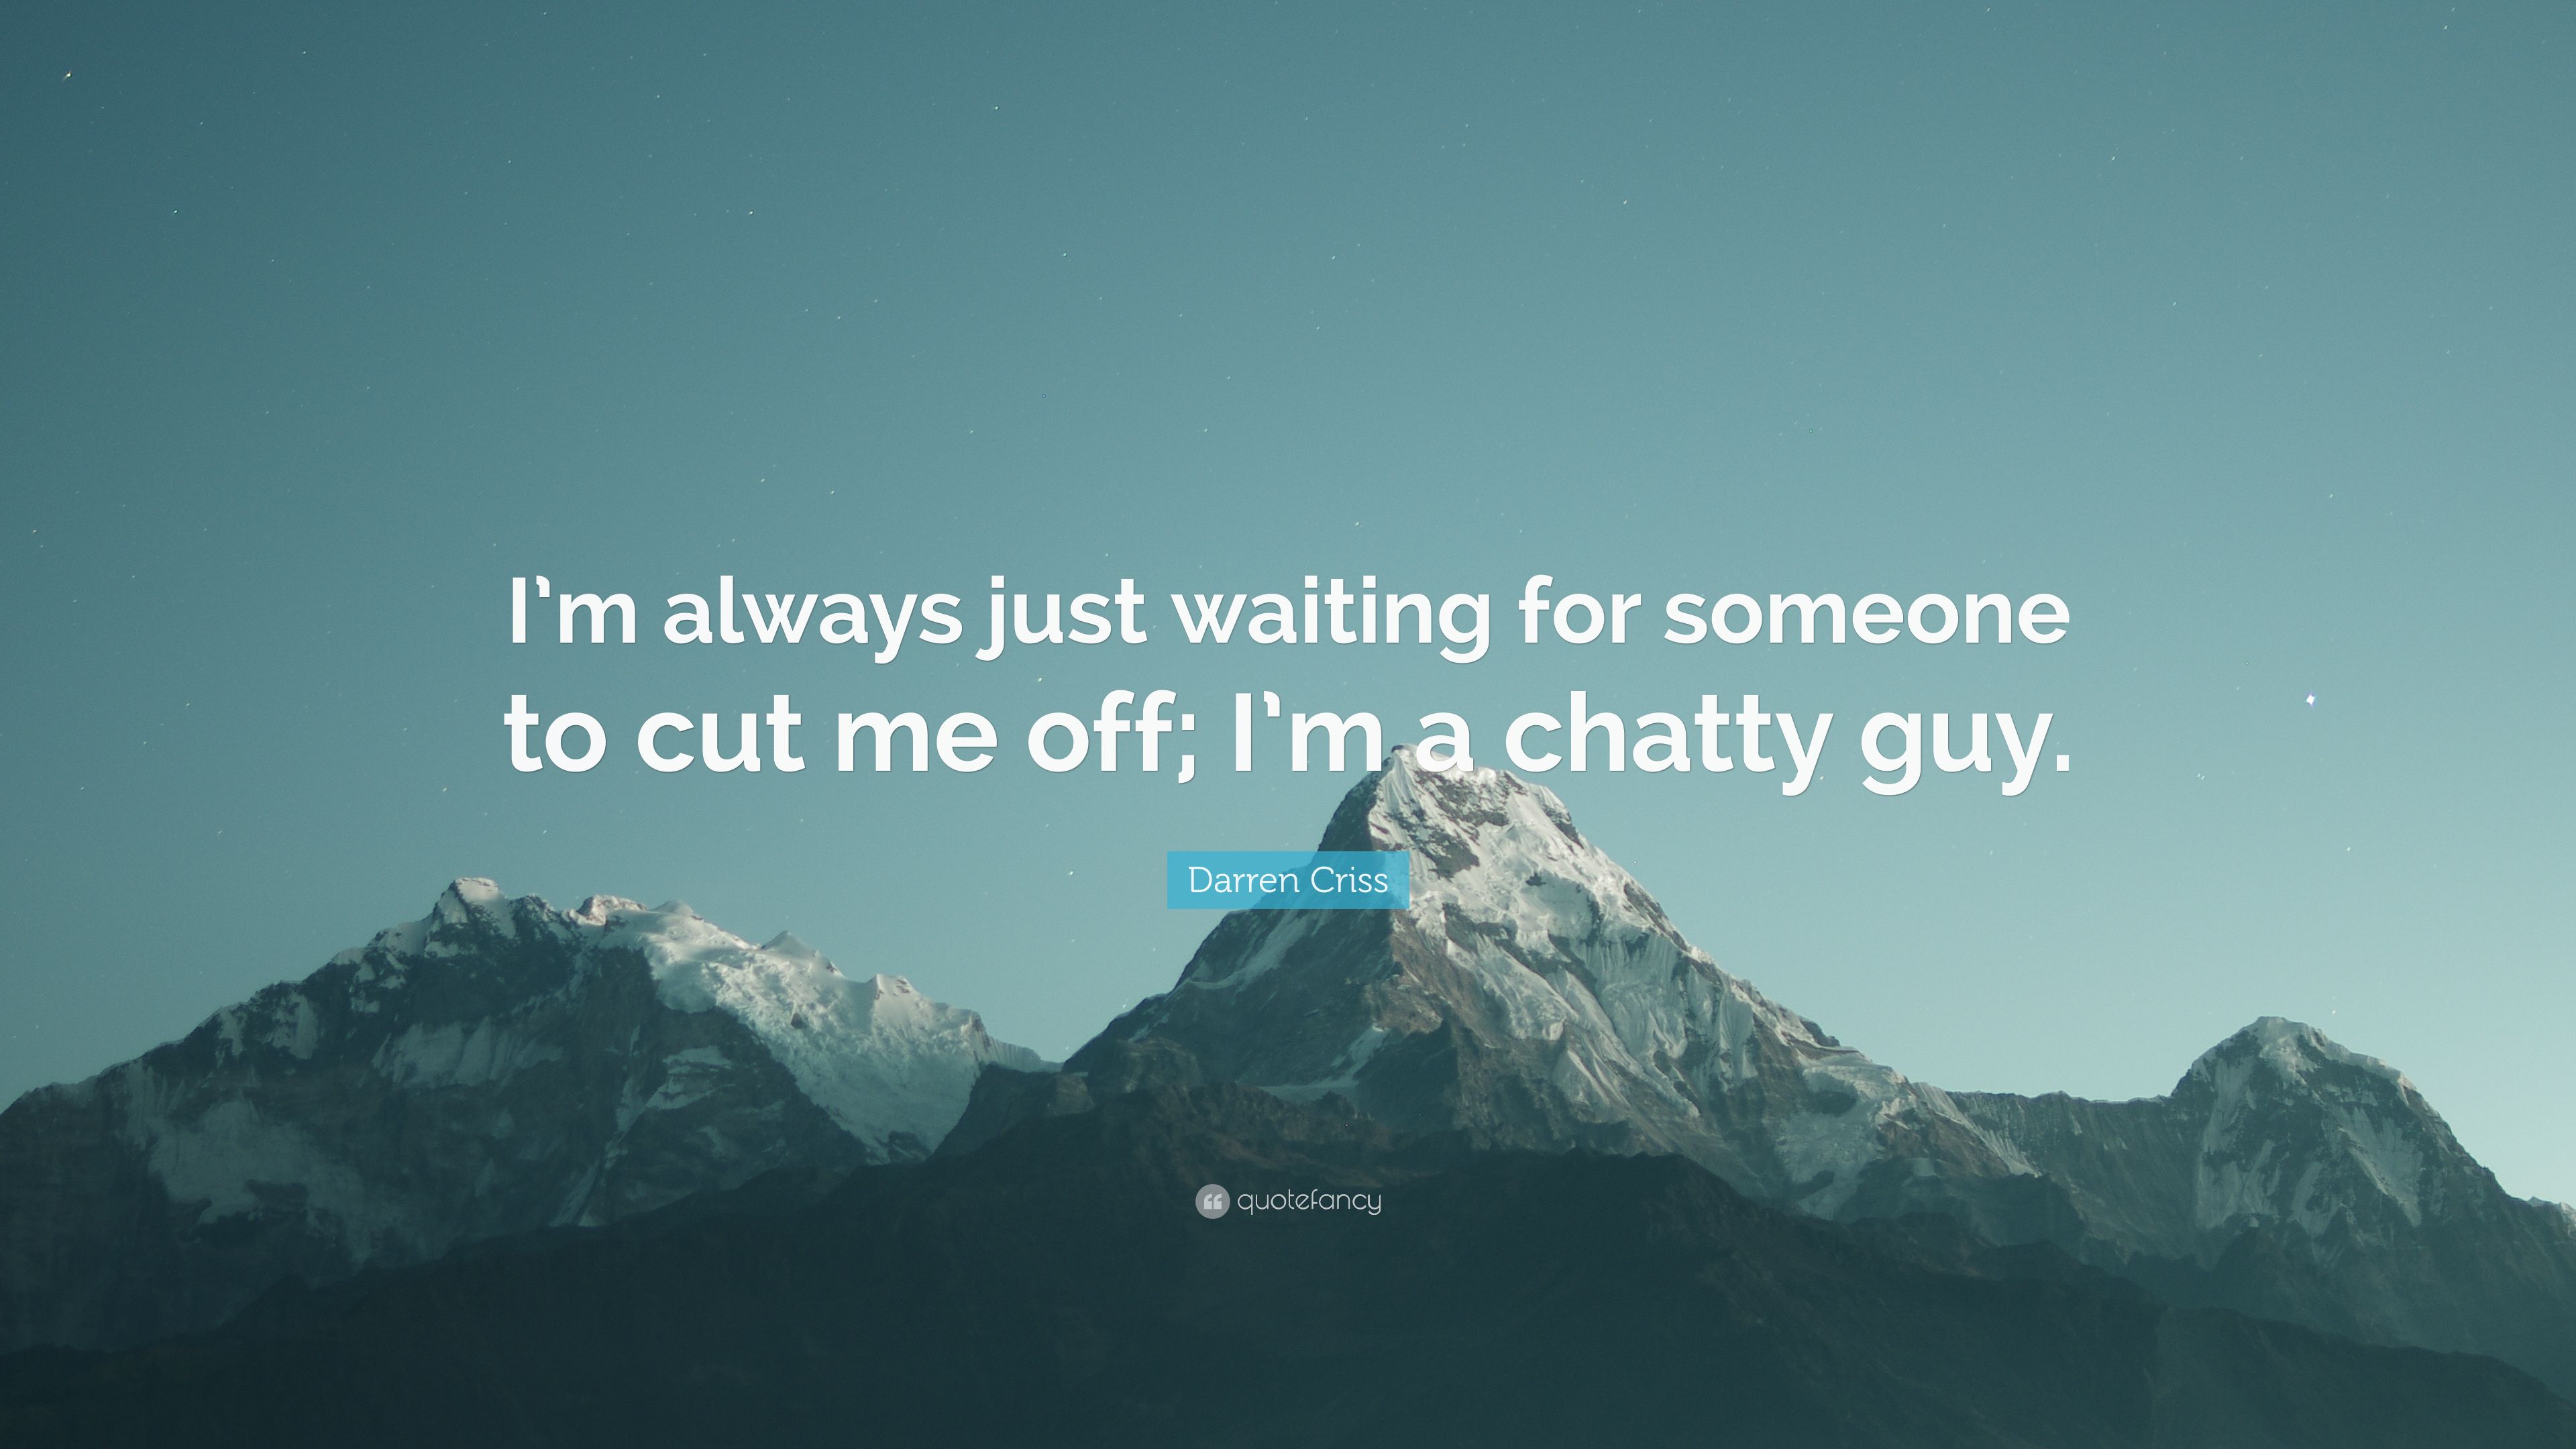 Darren Criss Quote: “I'm always just waiting for someone to cut me ...